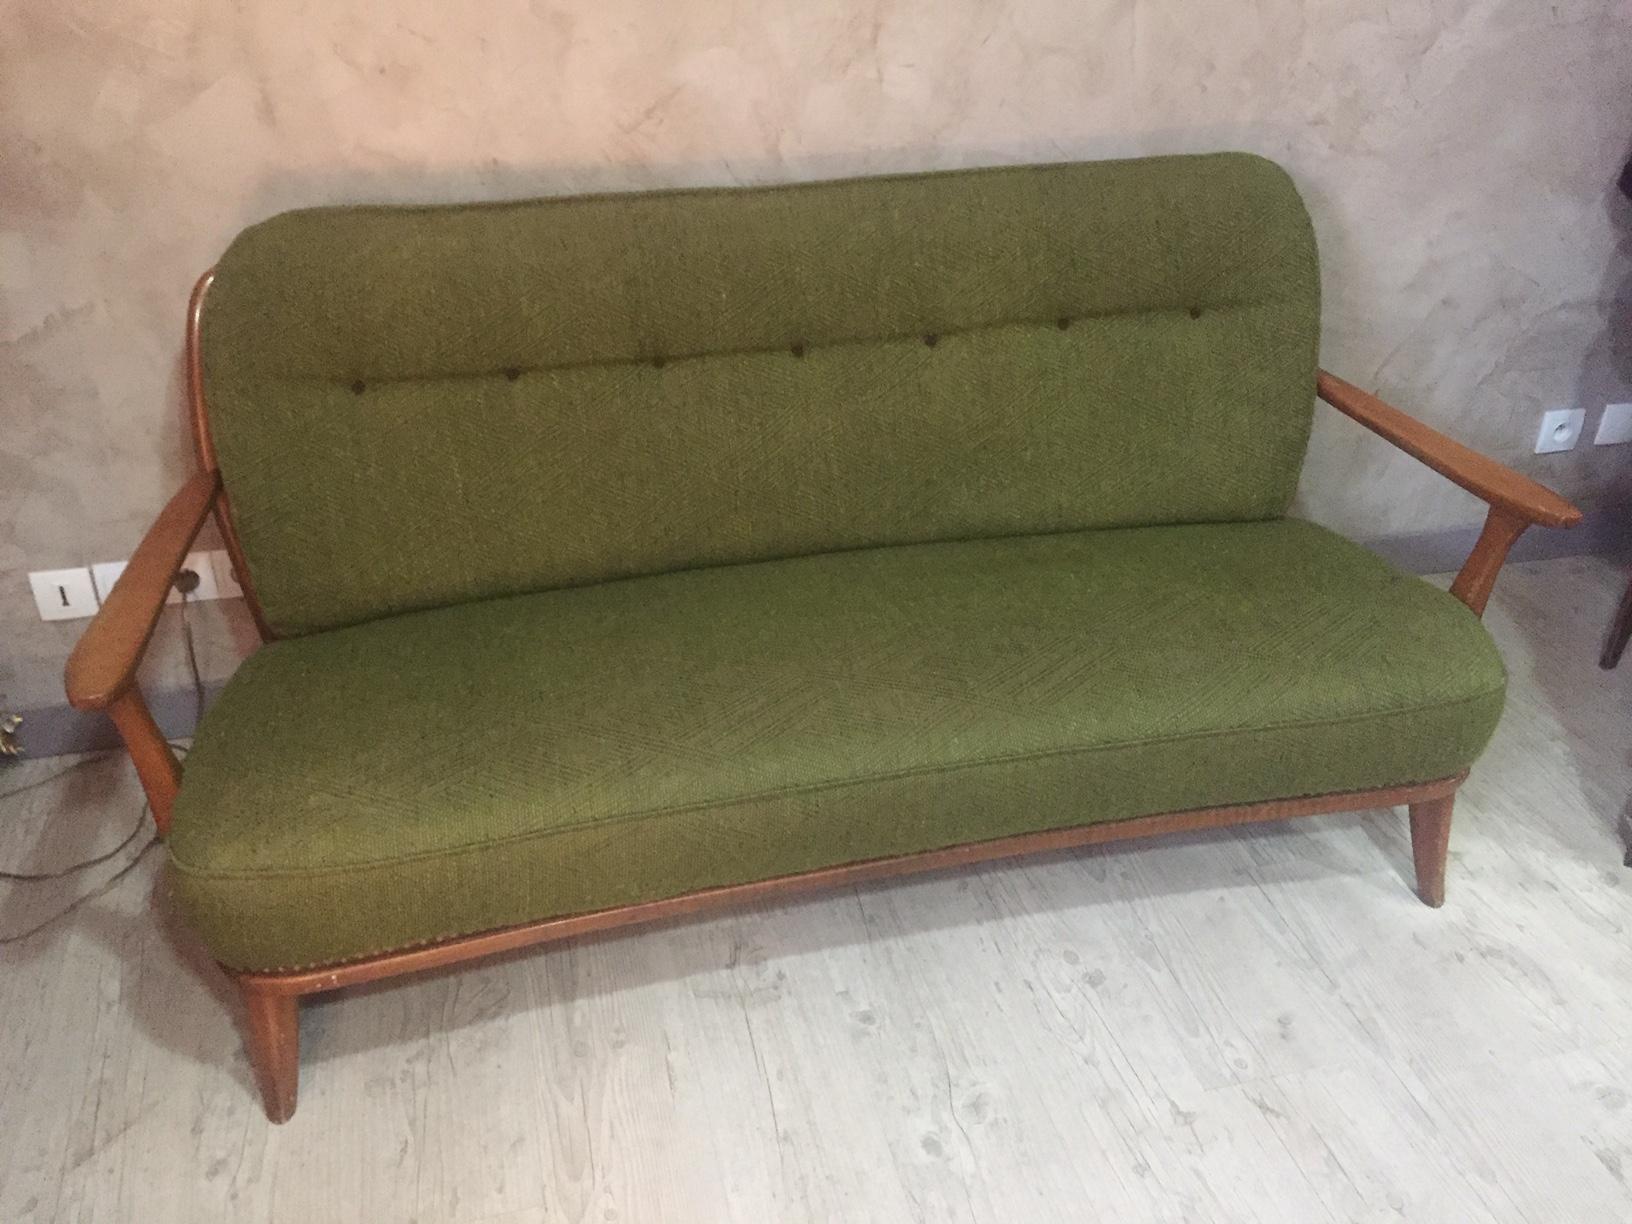 Very nice French vintage green fabric three seater sofa from the 1960s.
This is the original fabric. Some scratches on the wood but good condition.
      